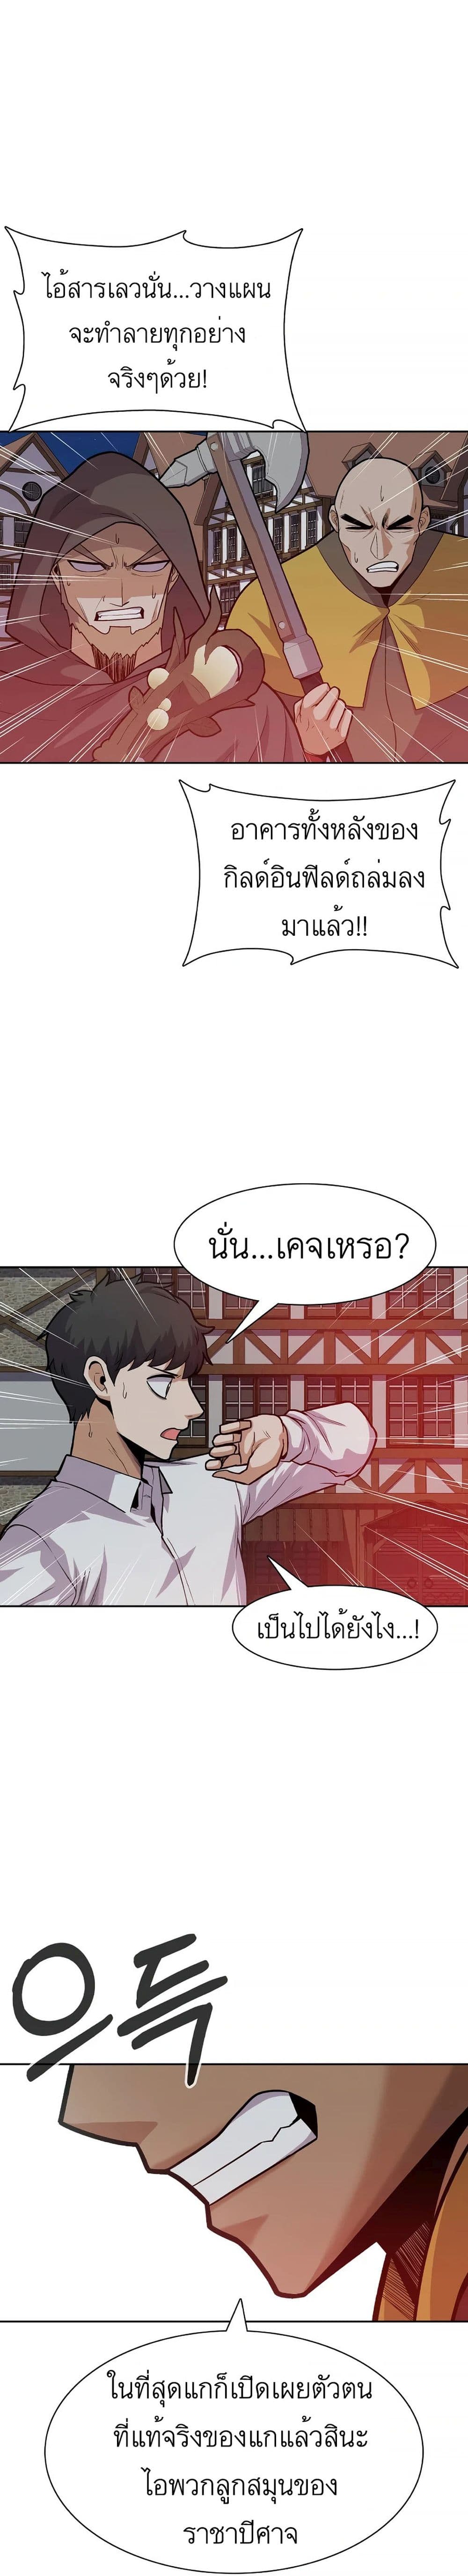 Raising Newbie Heroes In Another World ตอนที่ 15 (6)